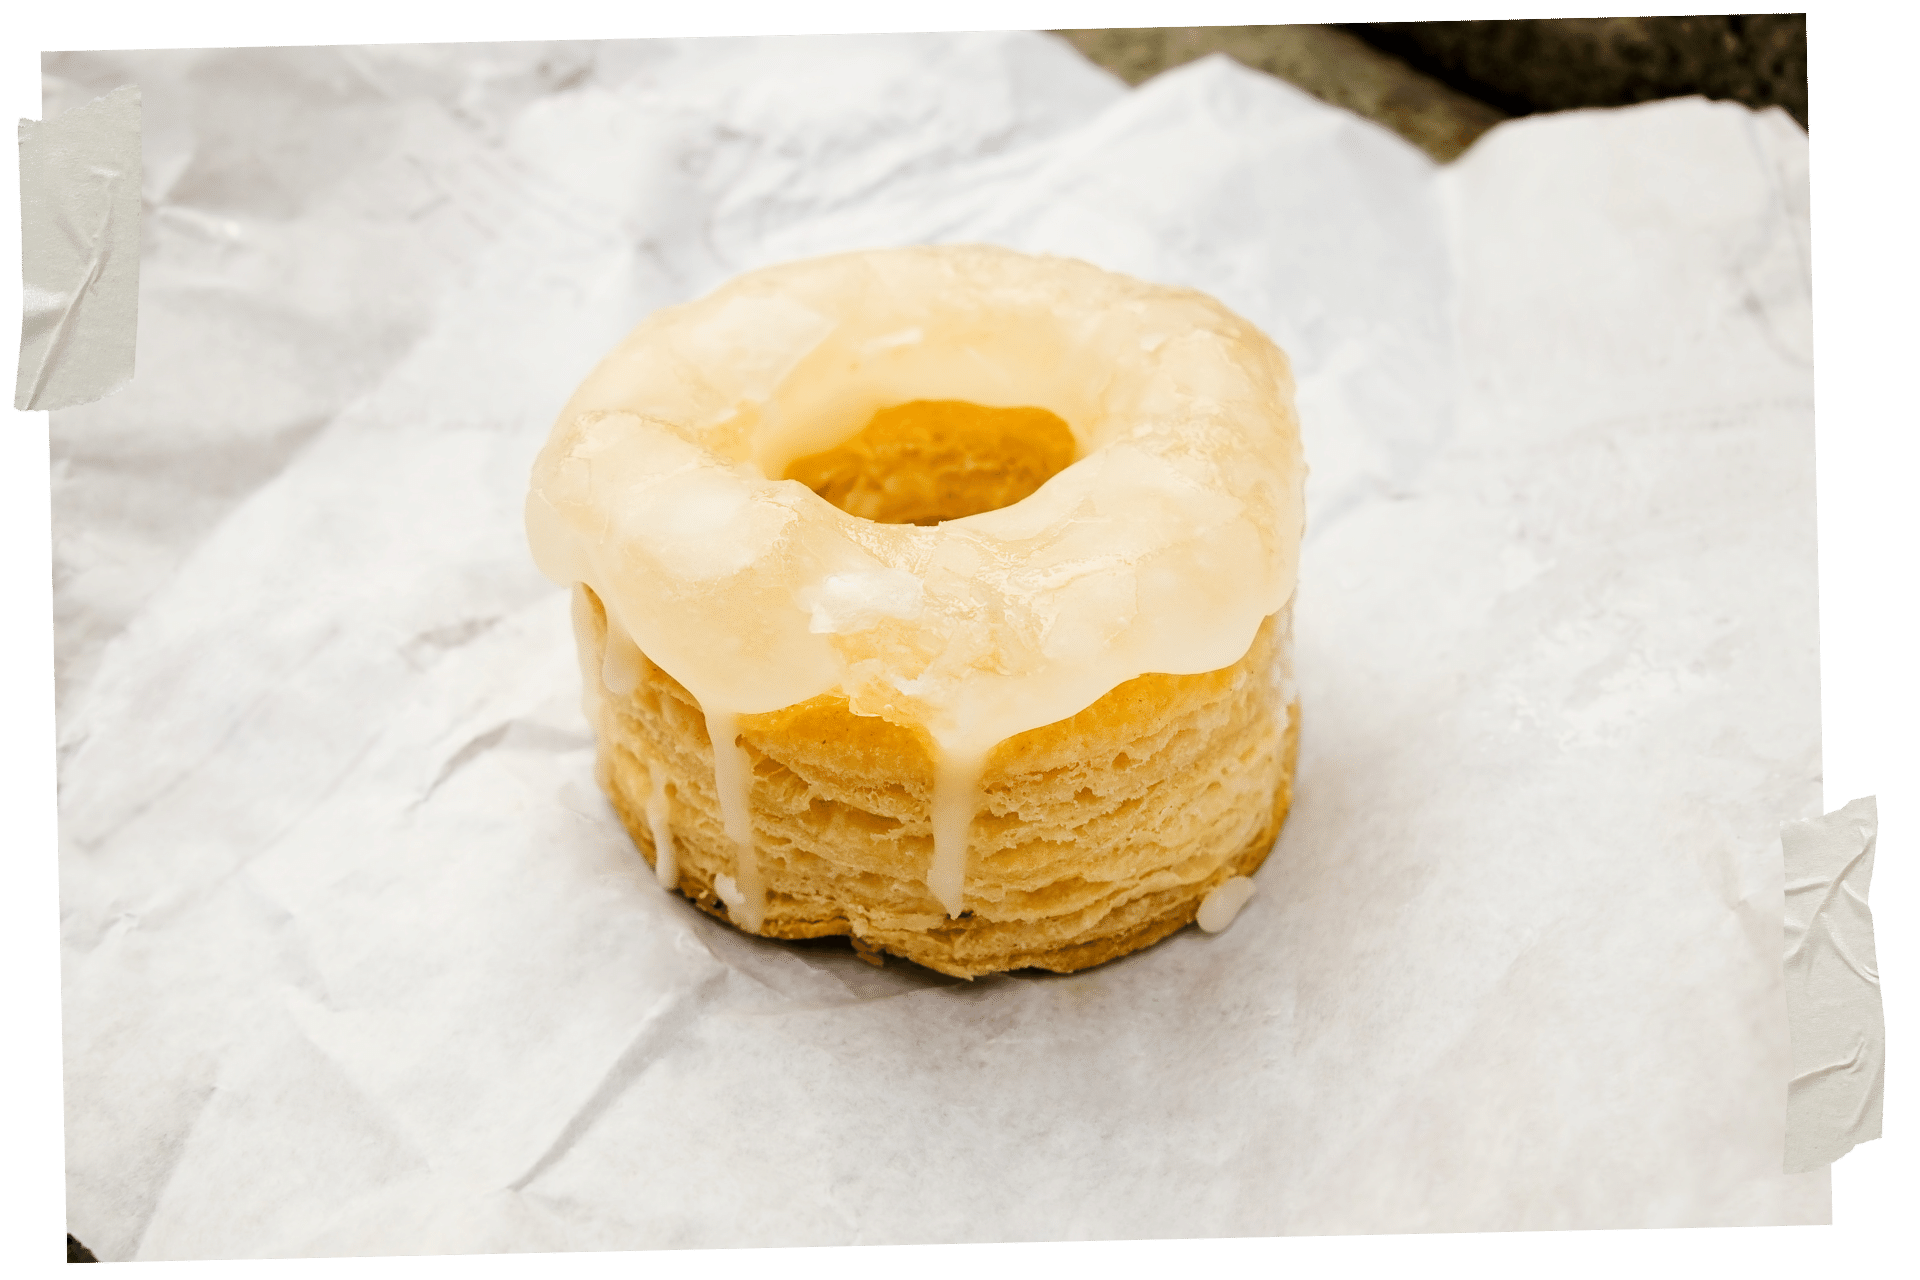 When it comes to New York for Foodies, you need to try a cronut. Pictured is a cronut - a mix between a croissant and a donut, on a piece of white tissue paper and with a pale yellow icing on top, dropping down the side.